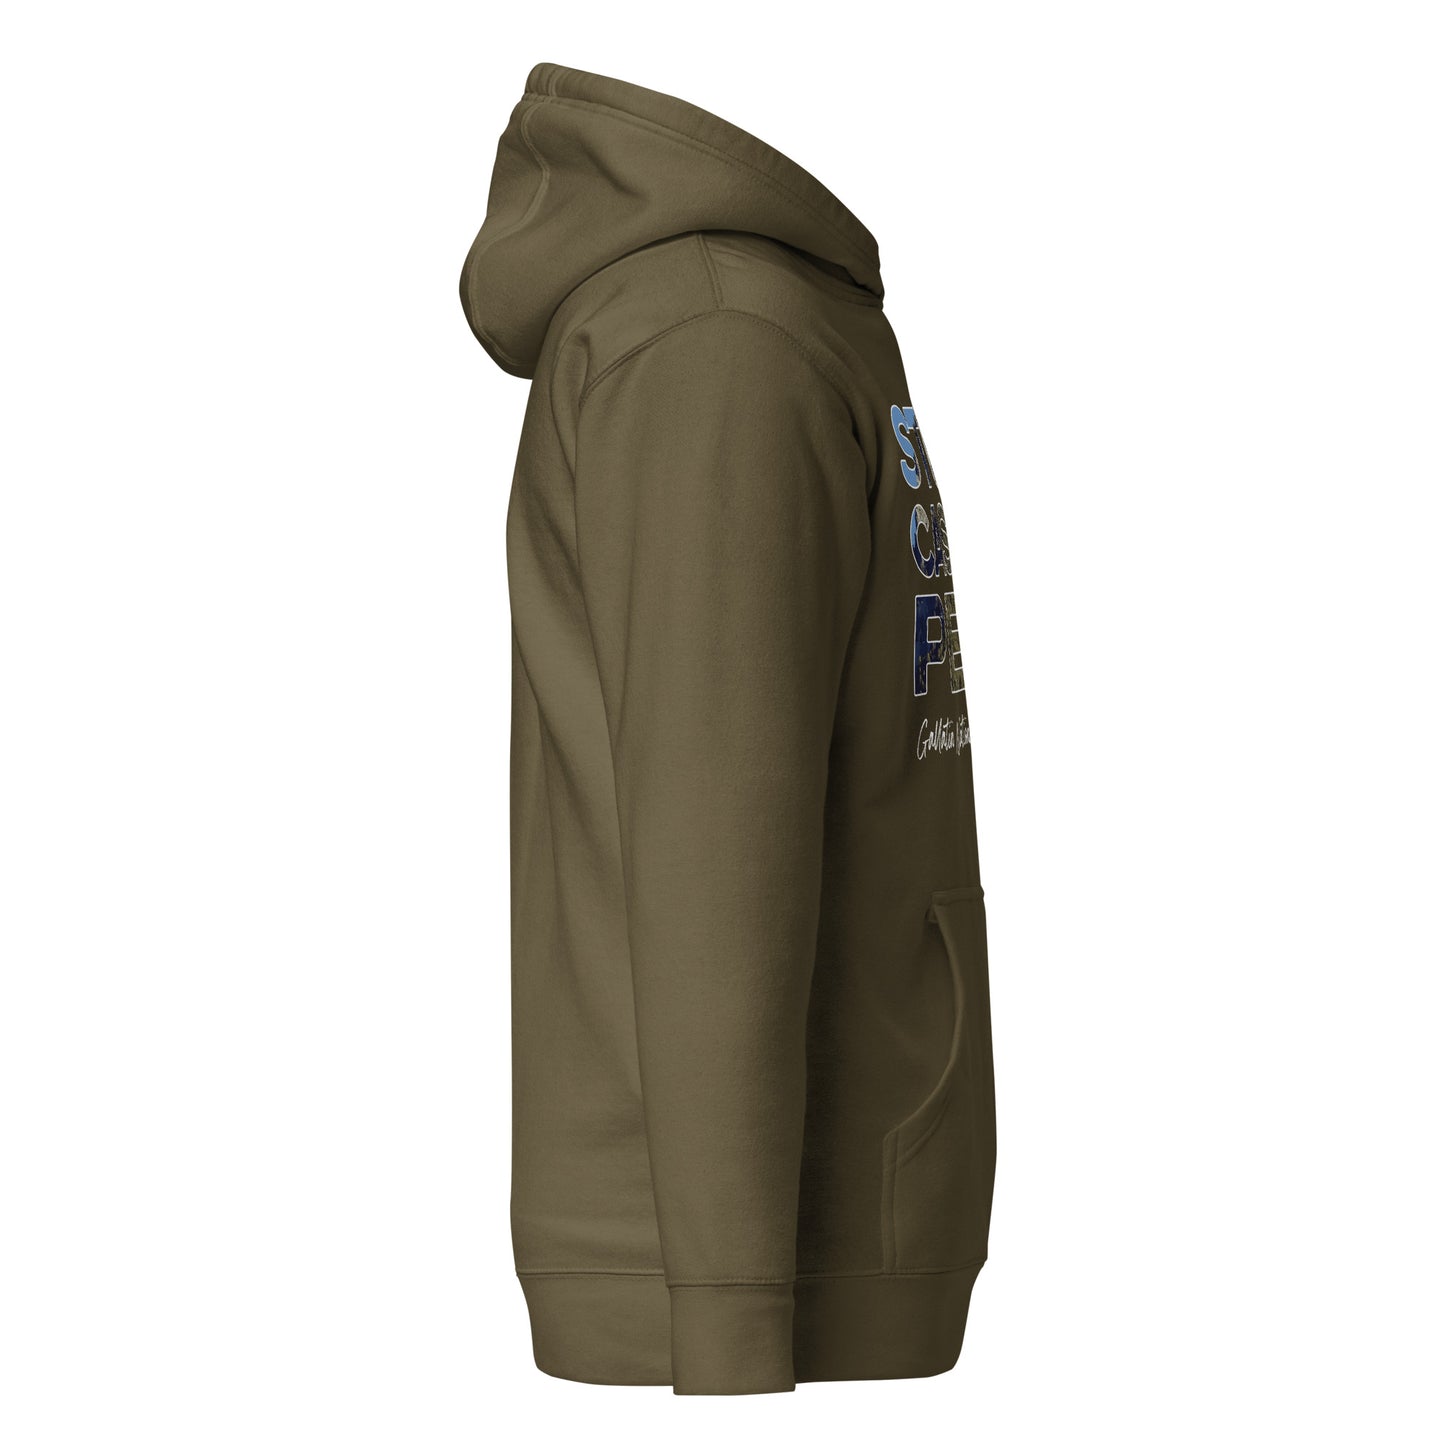 Right Side view of Storm Castle Peak in Custer Gallatin National Forest Montana Military Green Cotton Hoodie from Park Attire